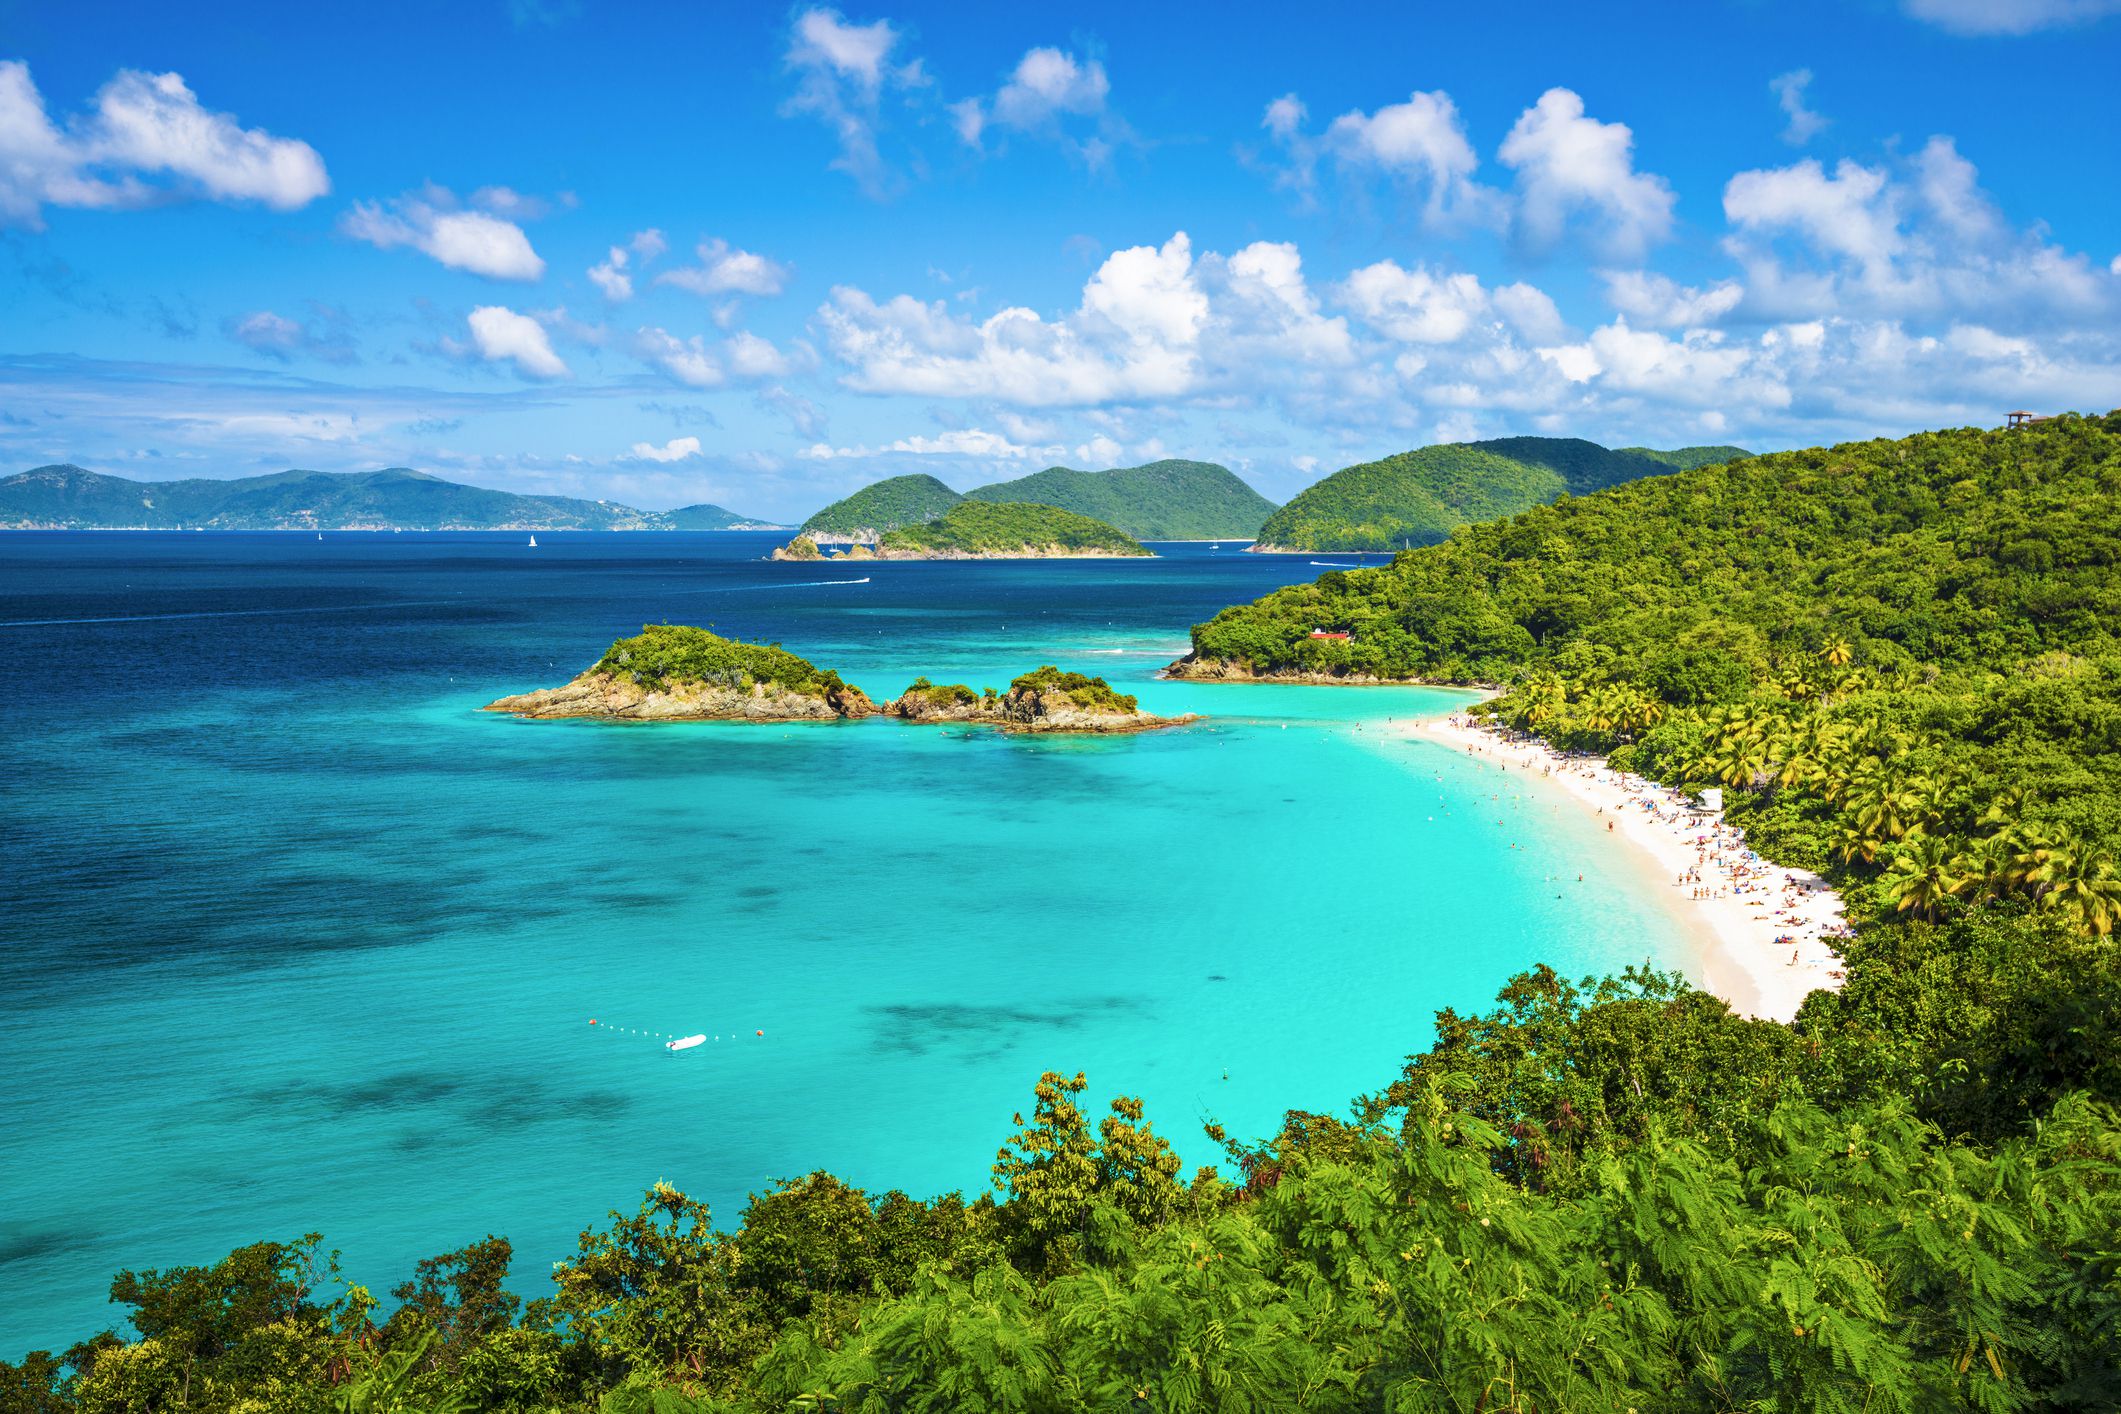 <p>A paradise for beach lovers, <a href="https://www.nps.gov/viis/index.htm">Virgin Islands National Park</a> includes ruins of a sugar plantation, ancient petroglyphs carved by the Taino Indians, and coral reefs teeming with marine life. A full two-thirds of the island of St. John is part of this national park. </p>